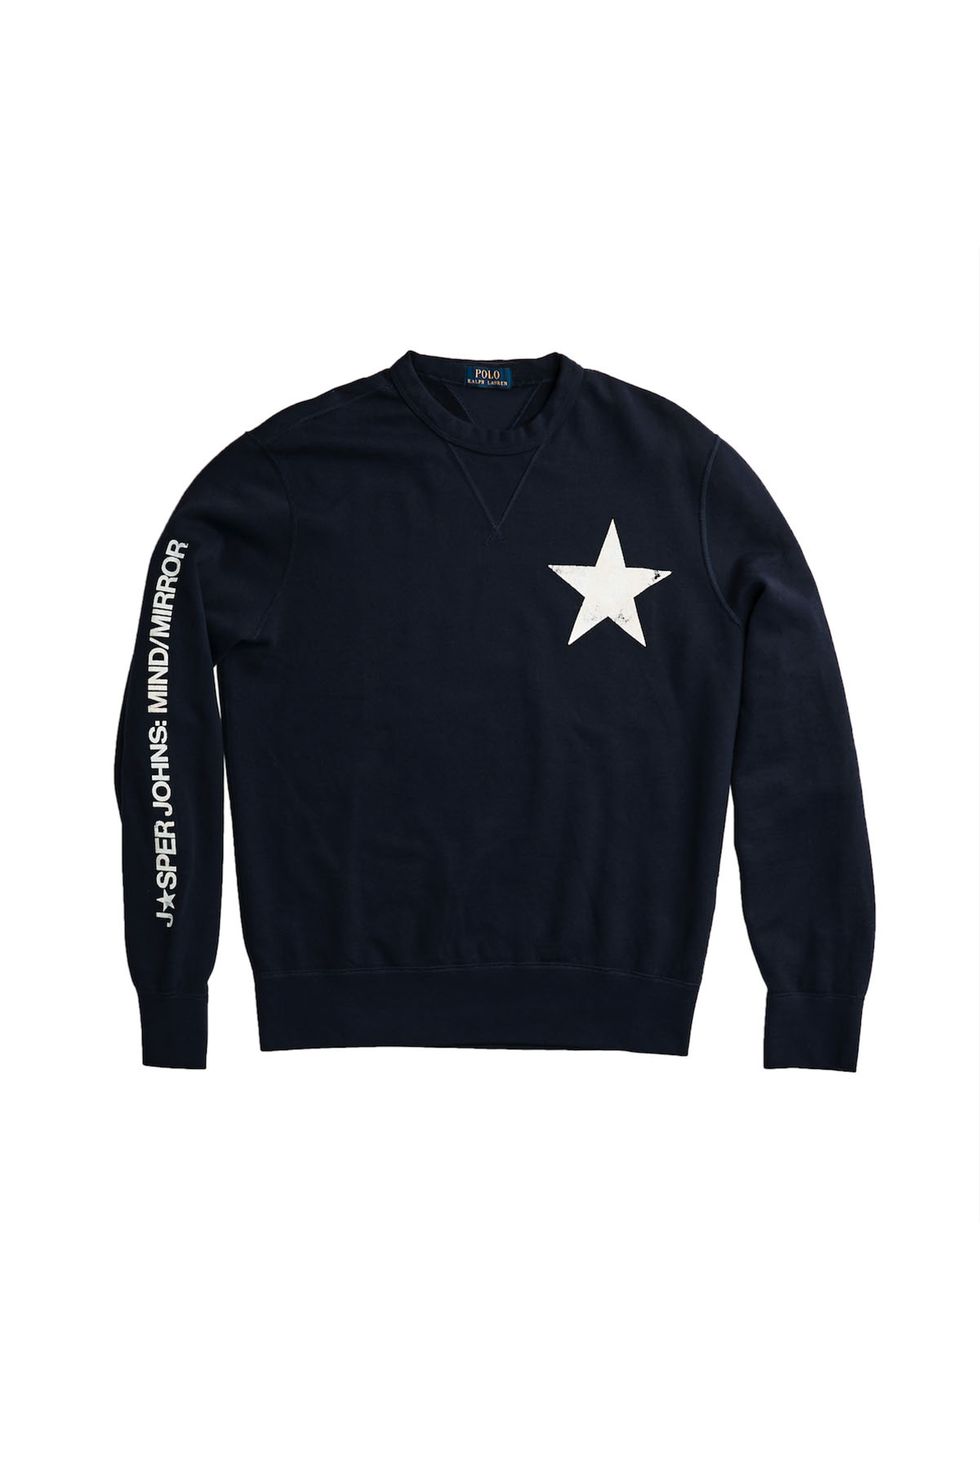 Polo Ralph Lauren Celebrates Jasper Johns With a Special Capsule